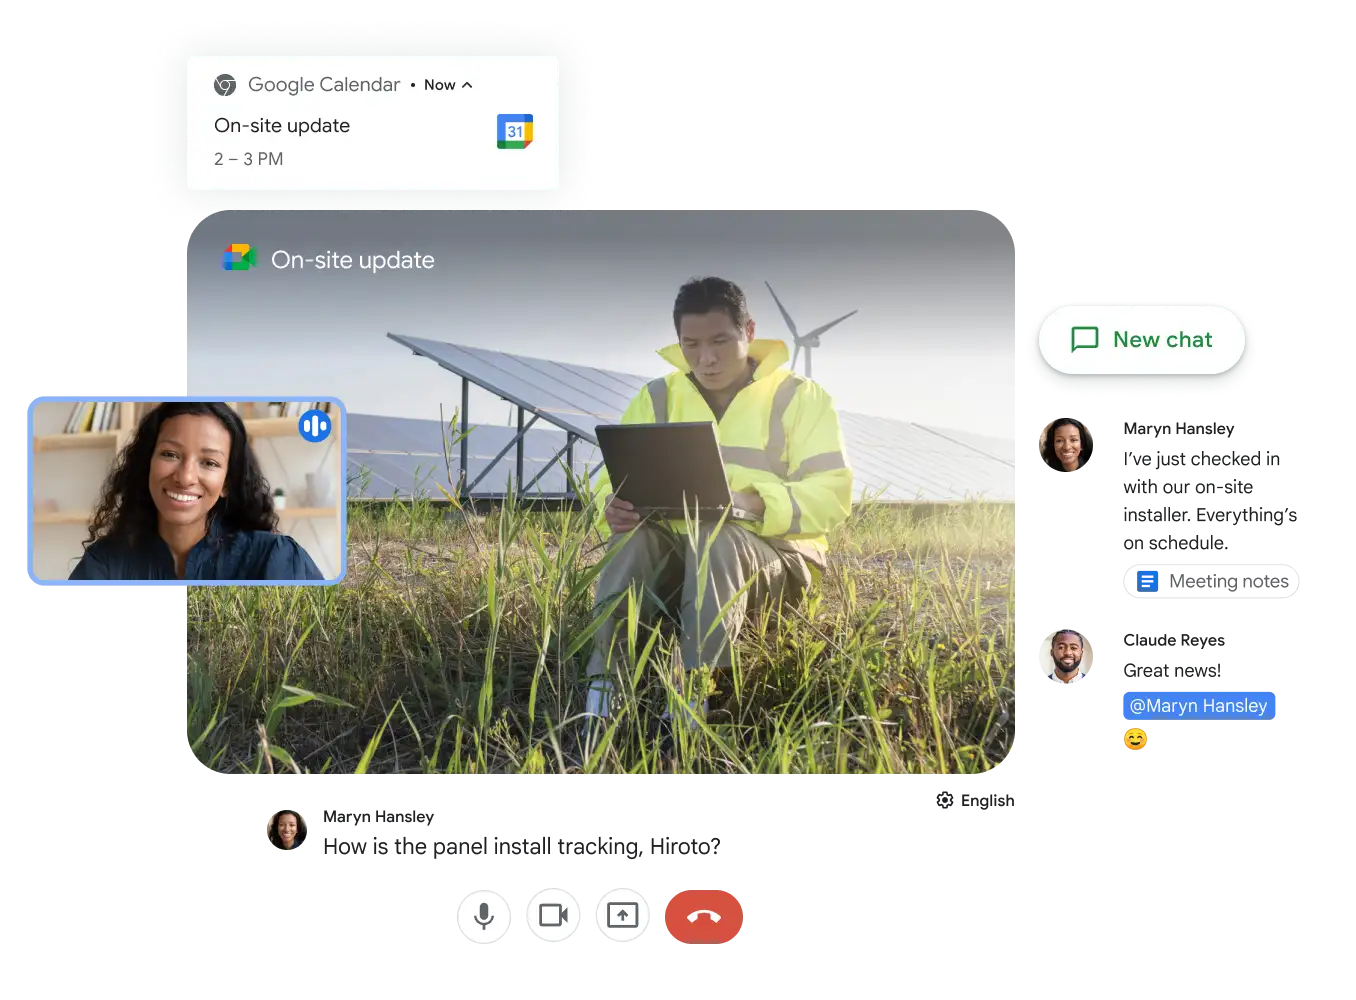 Google Meet and Google Chat to collaborate to enable teamwork.